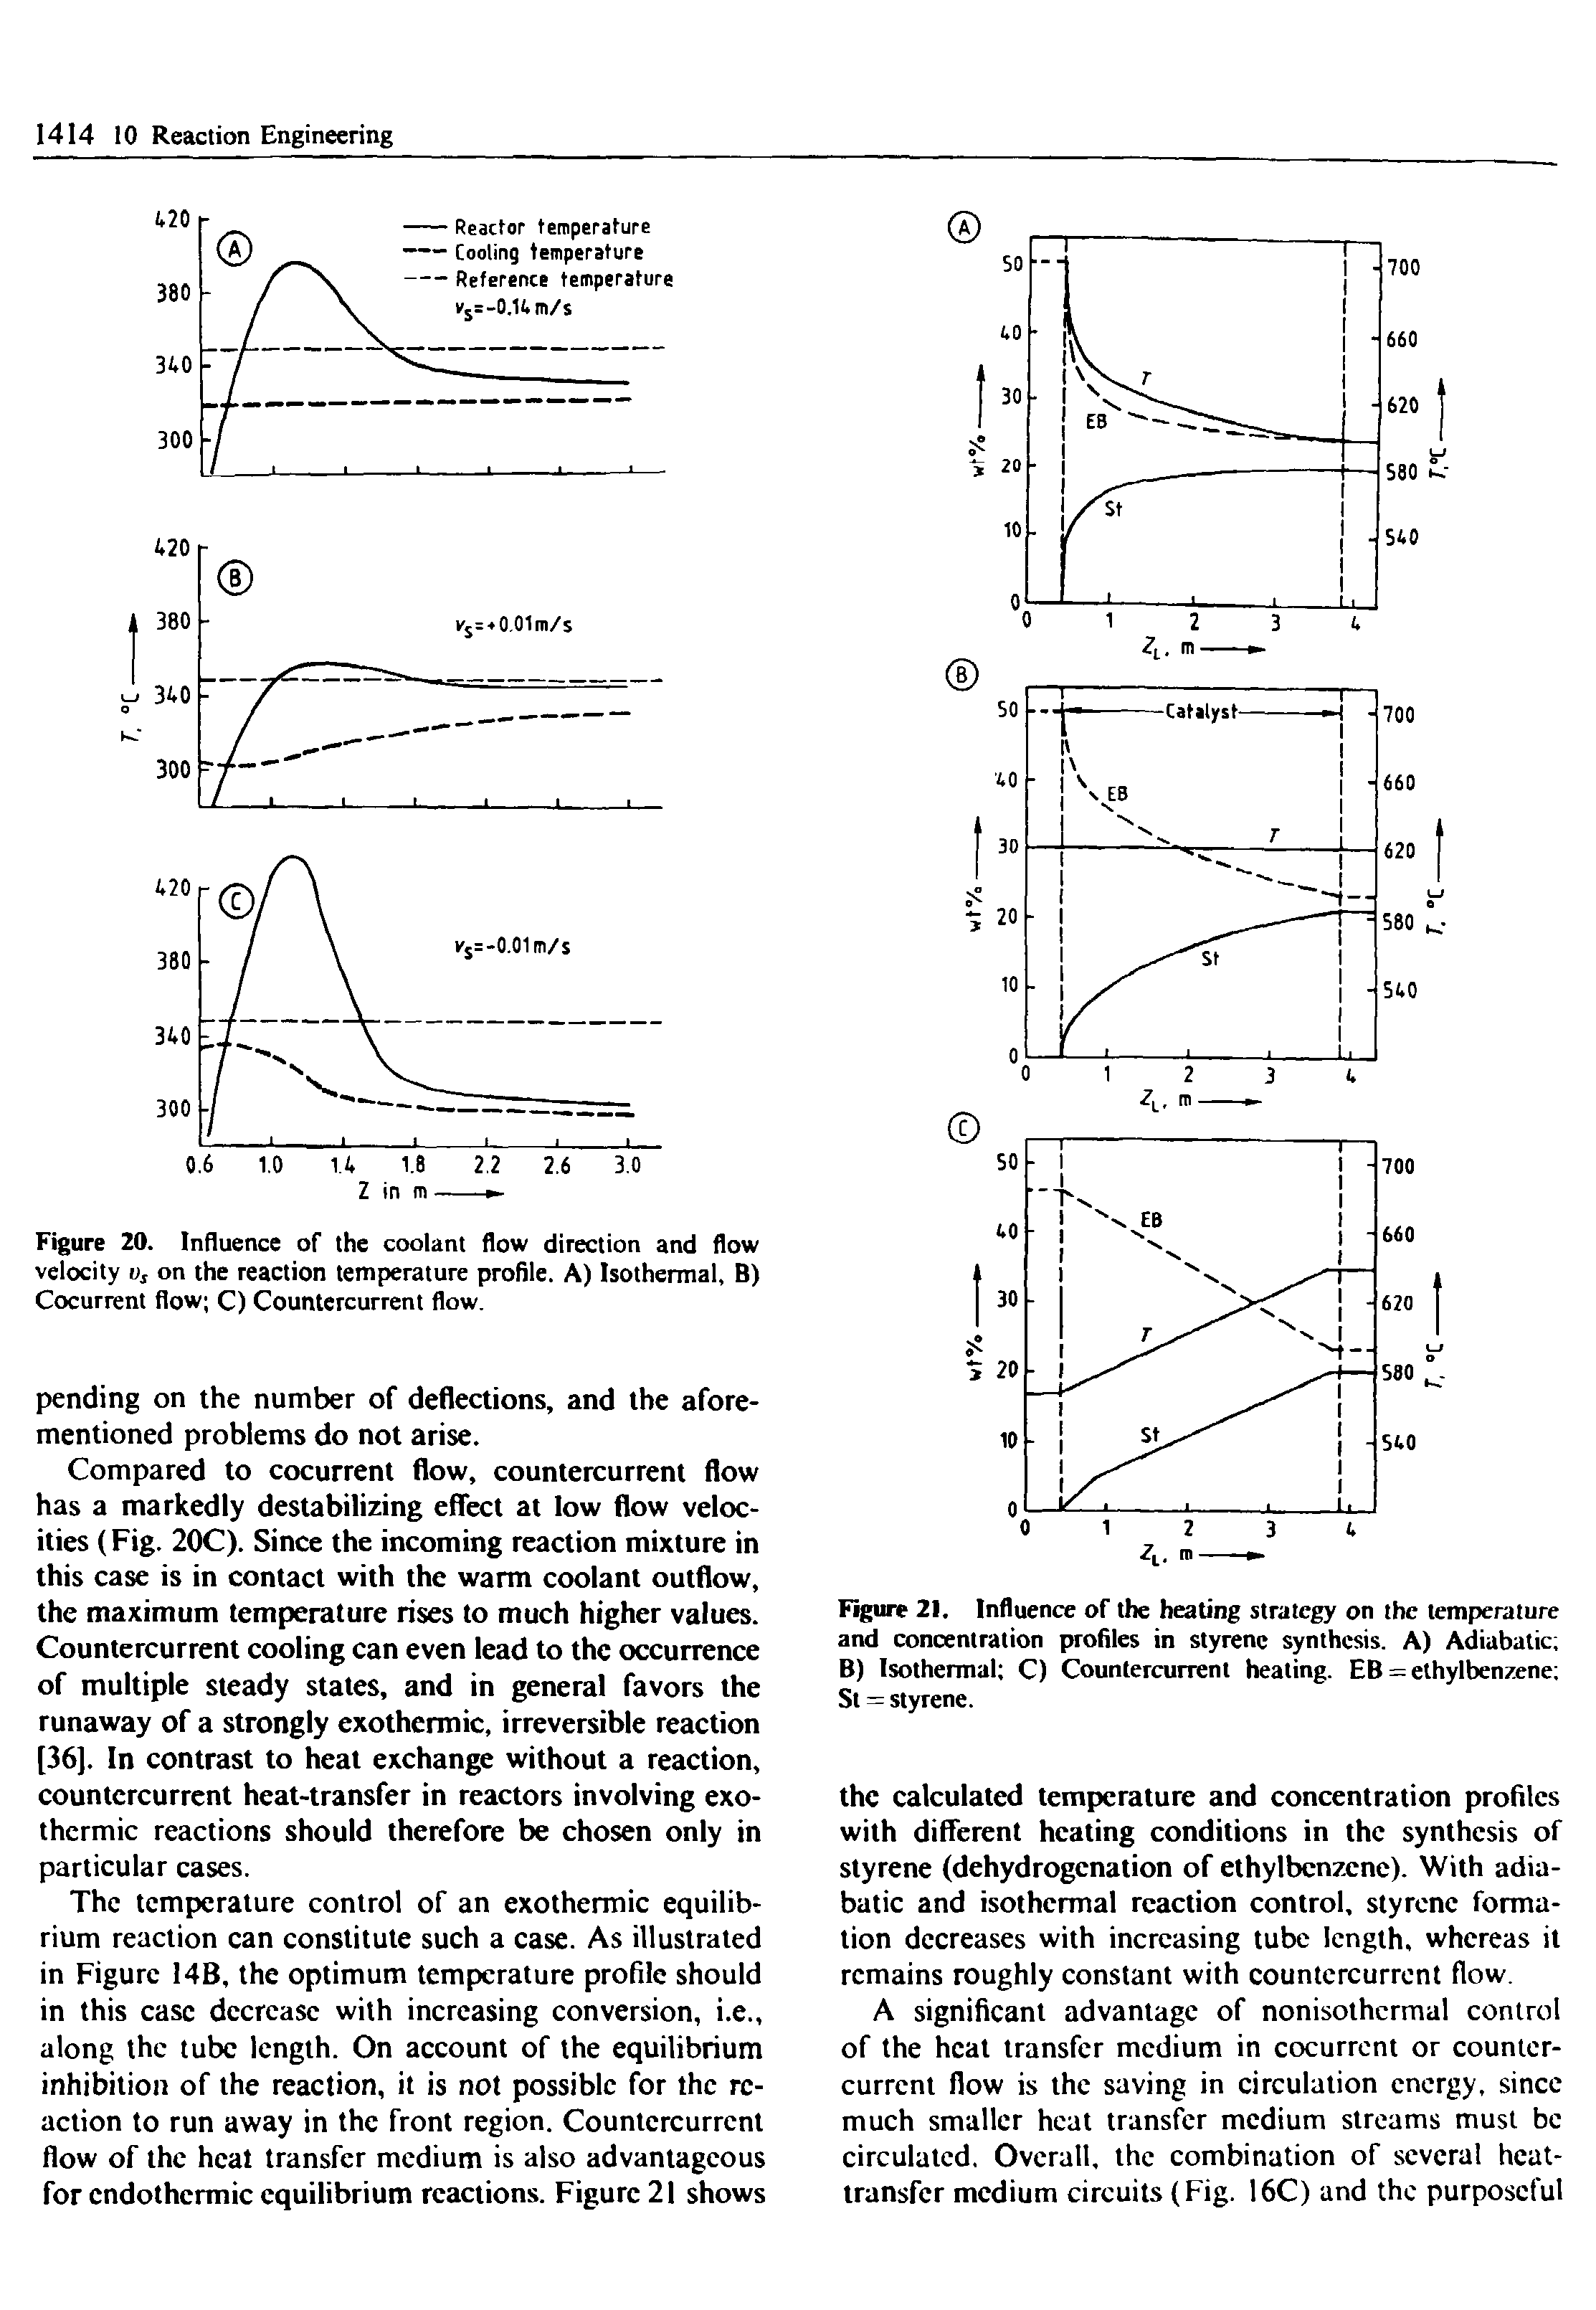 Figure 21. Influence of the heating strategy on the temperature and concentration profiles in styrene synthesis. A) Adiabatic B) Isothermal C) Countercurrent heating. EB = ethylbenzene St = styrene.